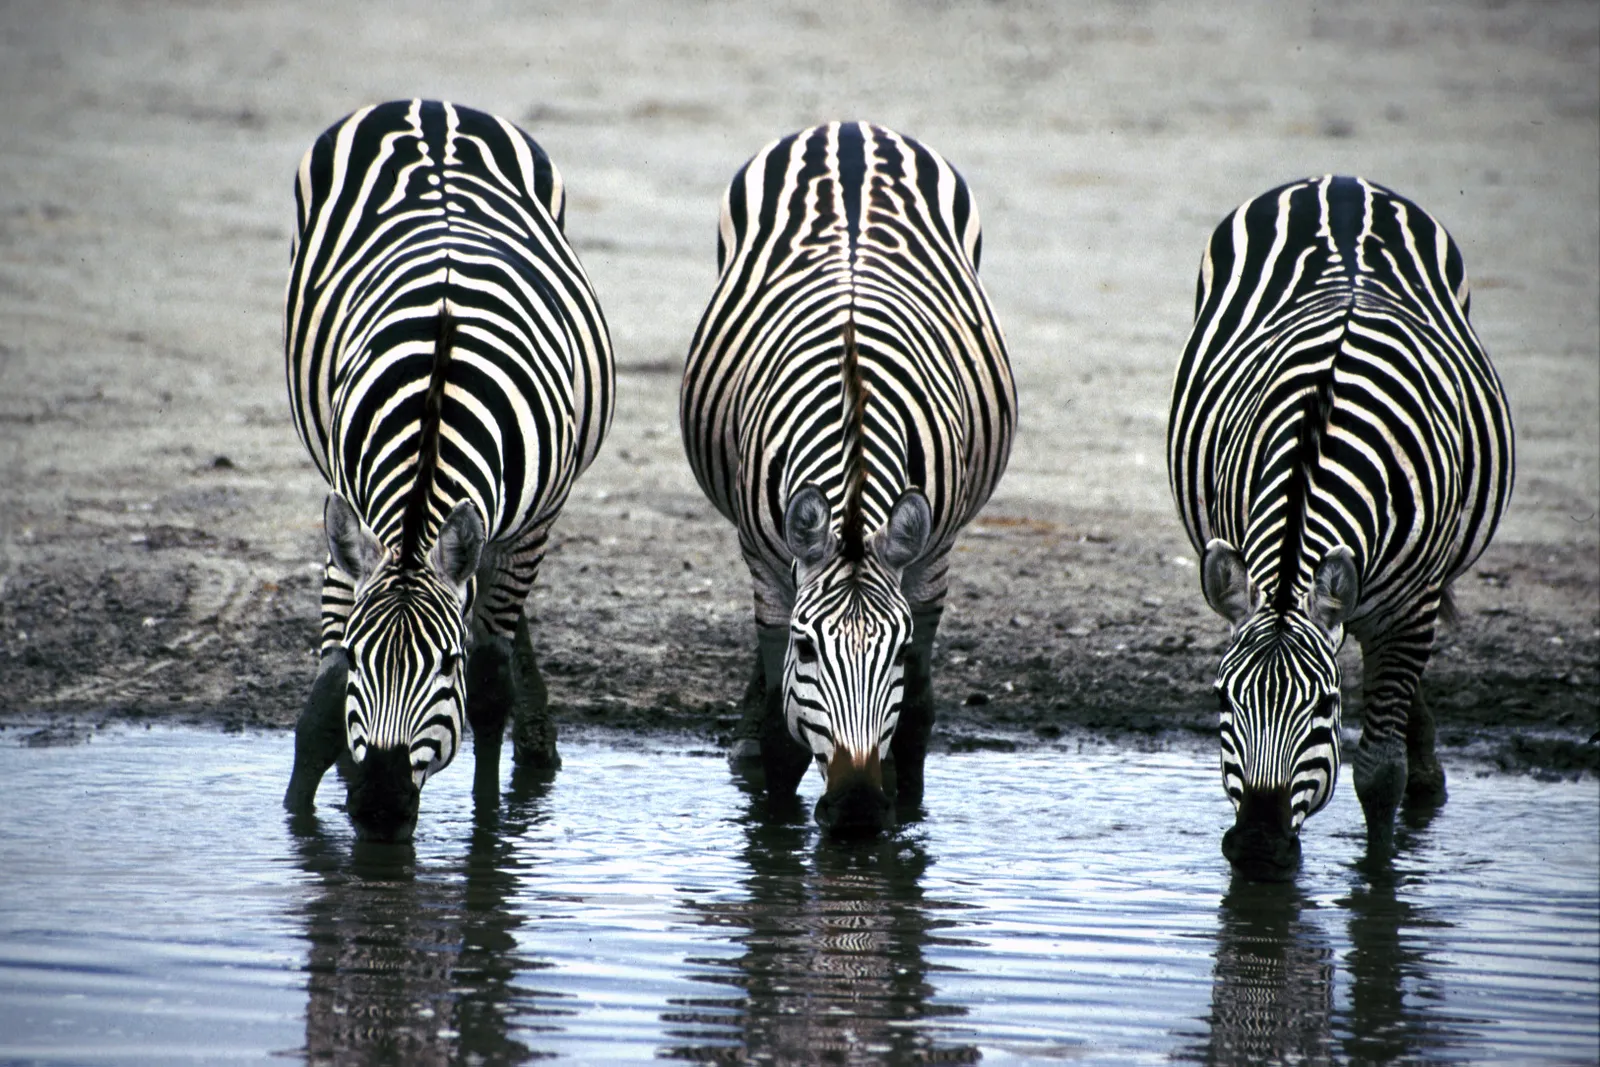 Why zebras have black and white stripes